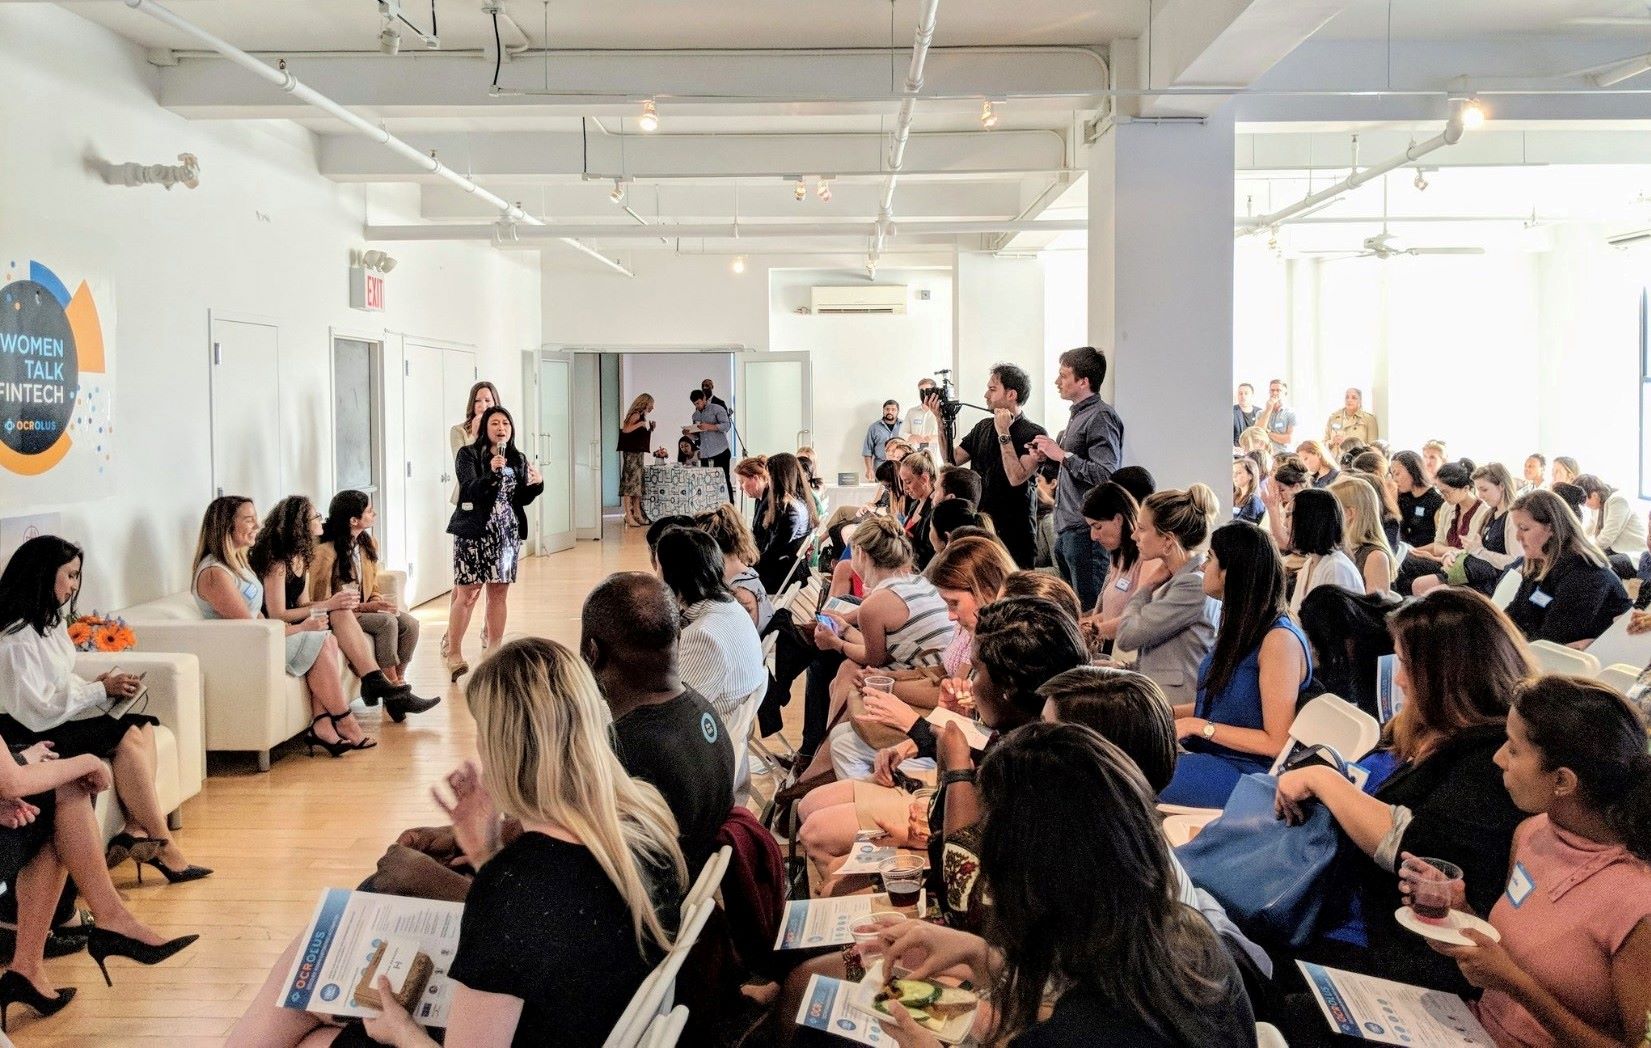 Ocrolus team collaborate at a meetup event in New York